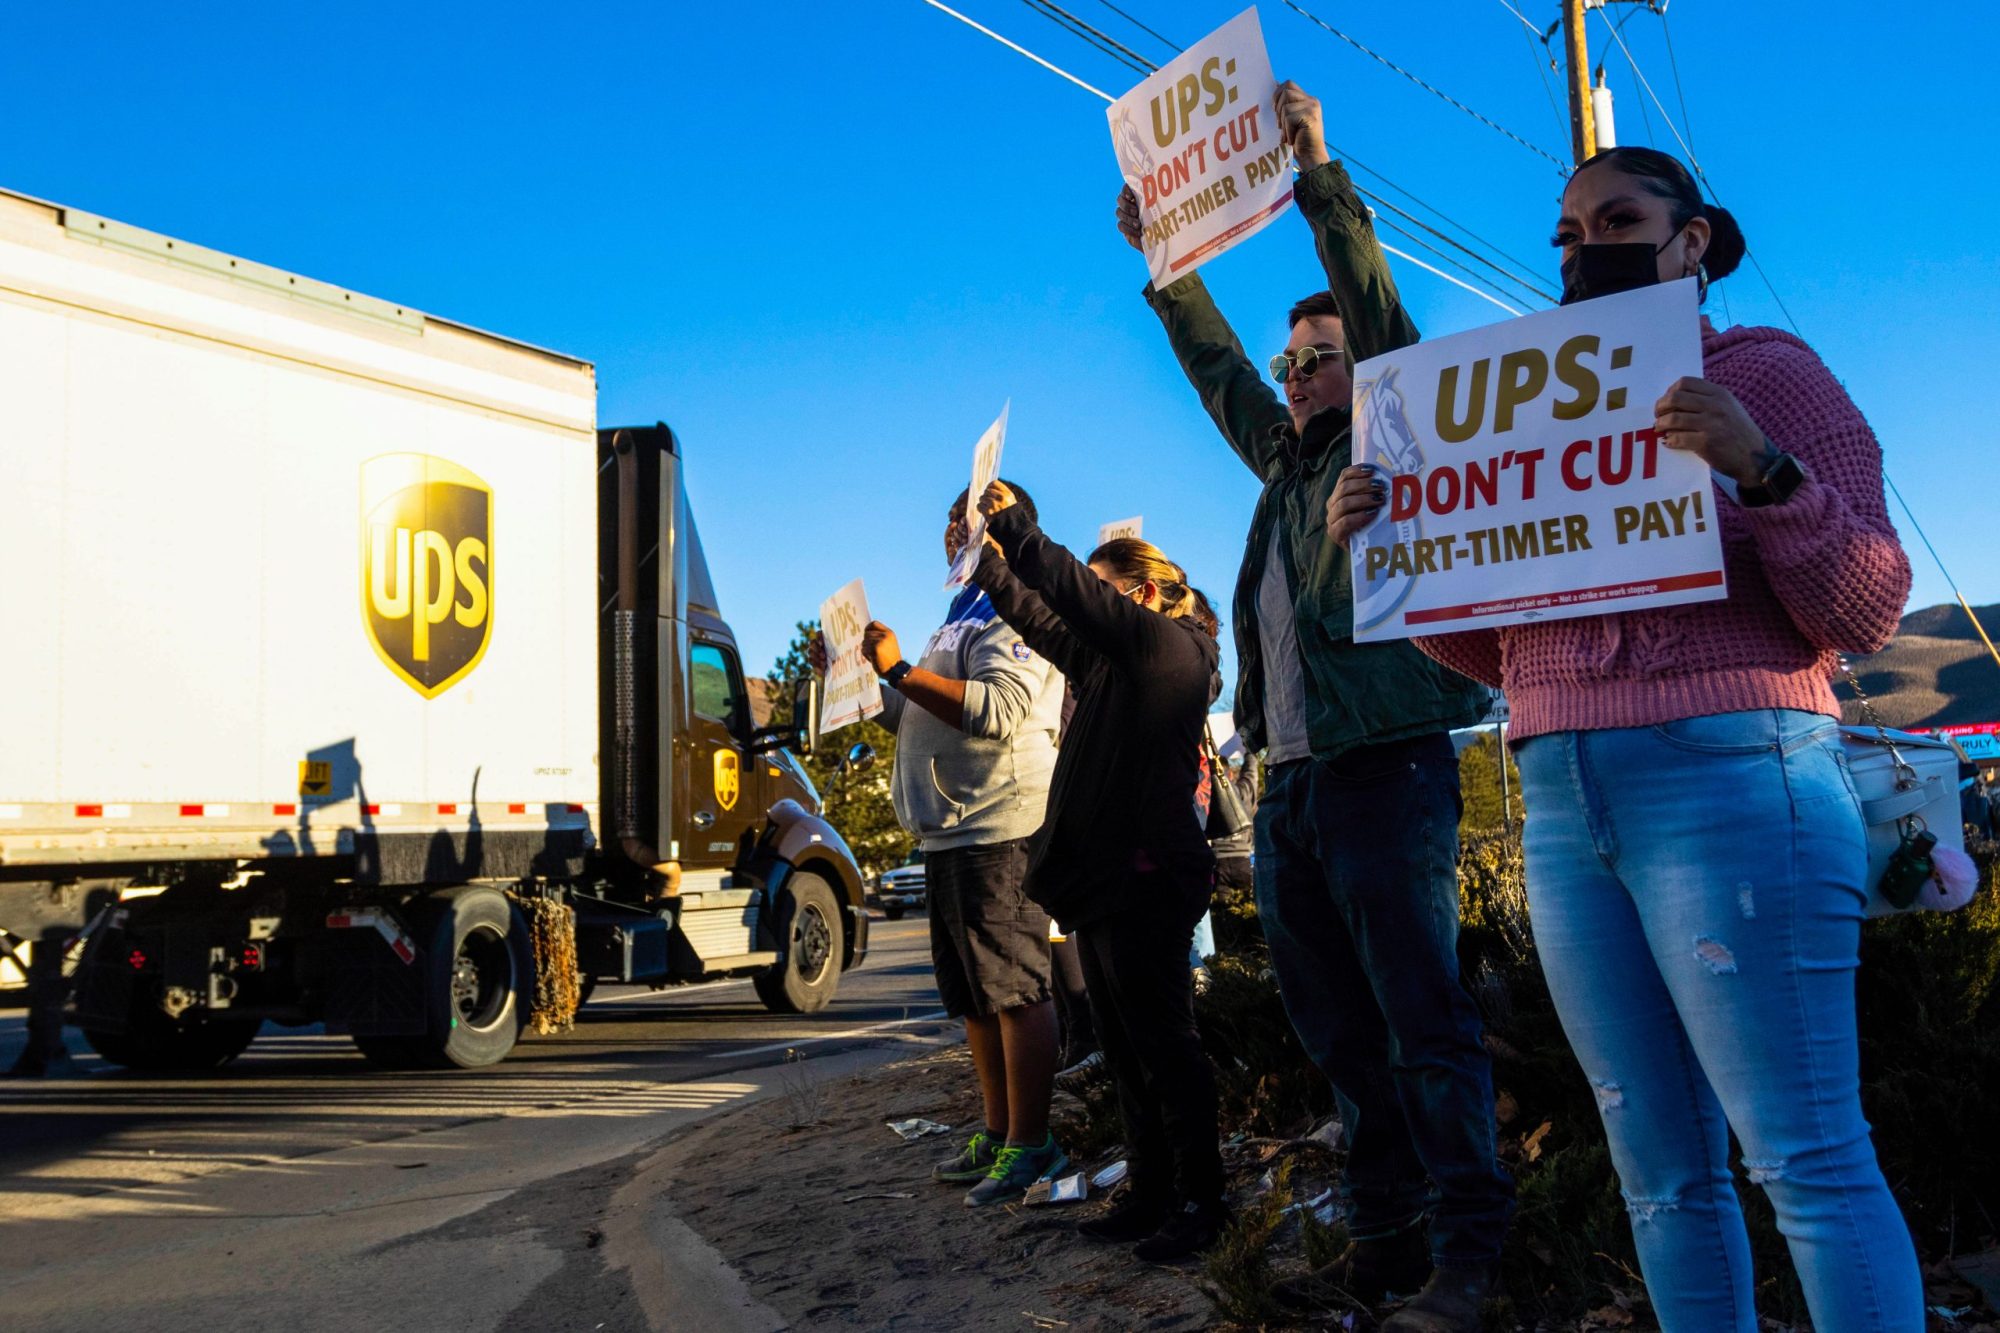 Four protesters holding placards stand at the curved dirt shoulder of a road as a massive 18-wheeler UPS semi-truck with the logo displayed on the side drives past. The protesters' signs say "UPS: Don't cut part-timer pay!"